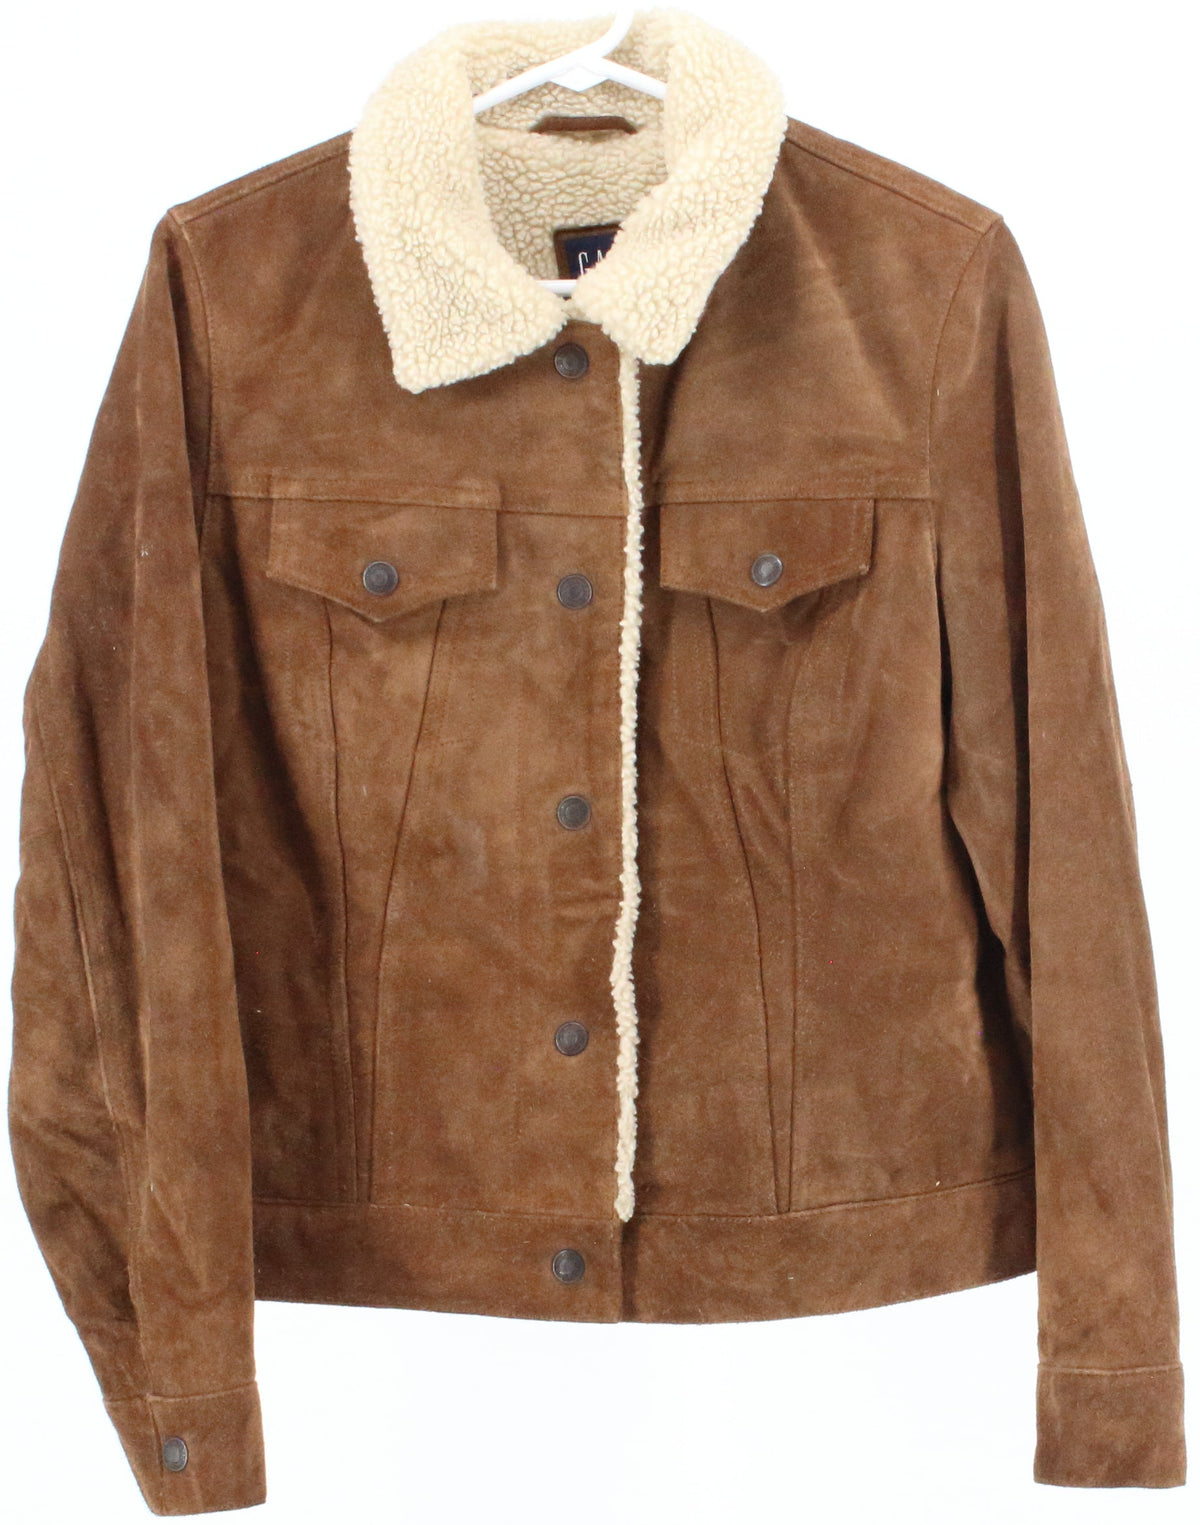 Gap Brown Leather Jacket With Sherpa Lining